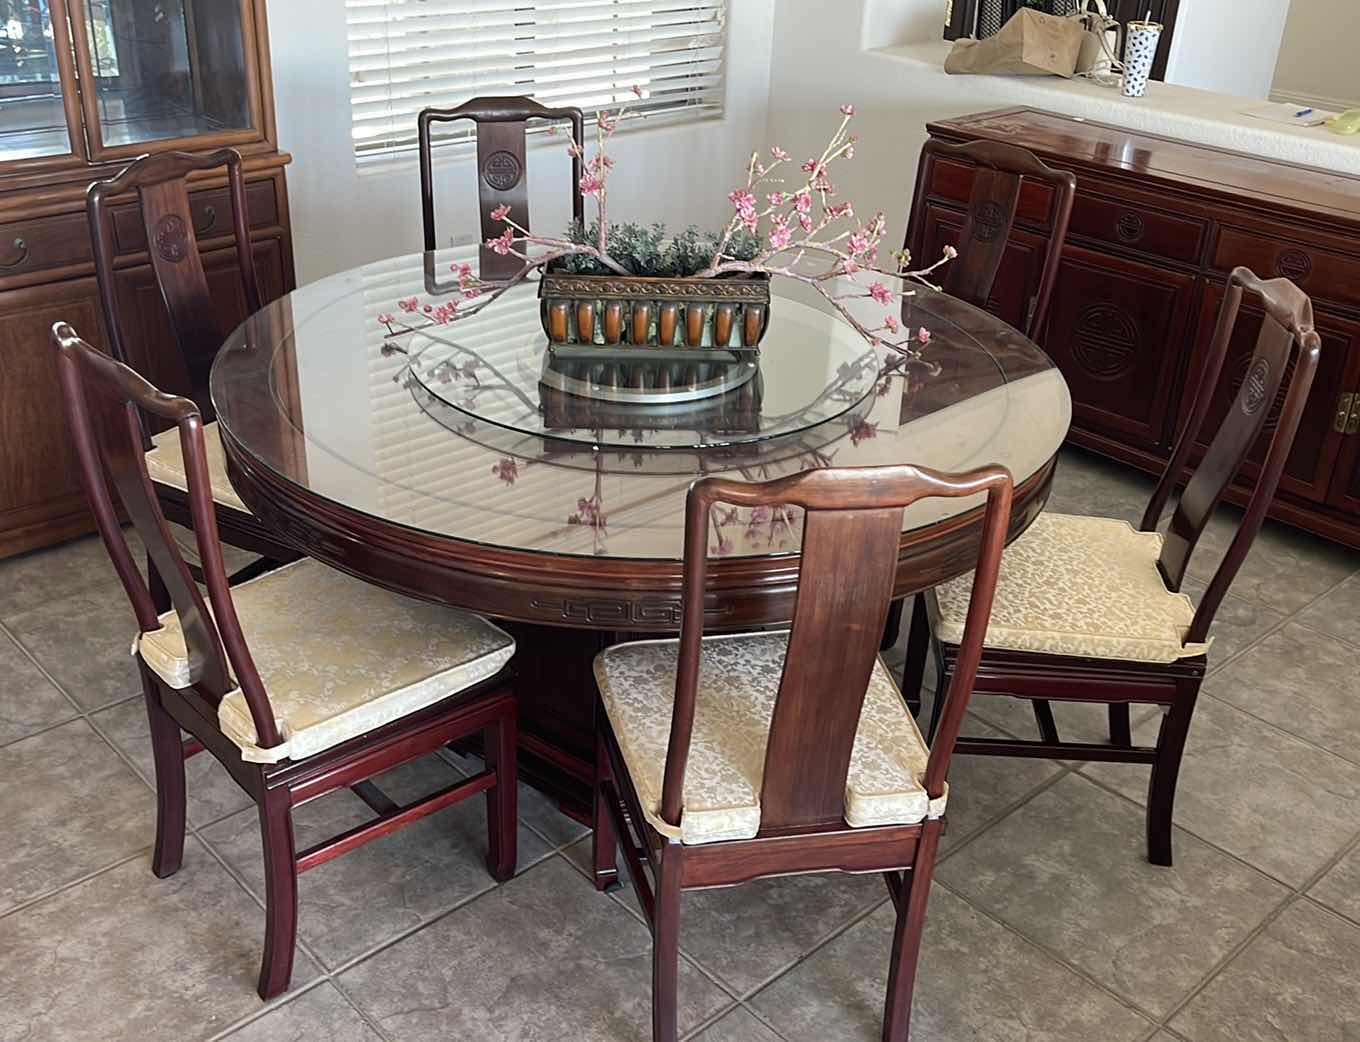 Photo 1 of 36" ROUND CHINESE DESIGN ROSEWOOD DINING TABLE W GLASS PROTECTIVE COVER & LAZY SUSAN,  6-MATCHING SIDE CHAIRS 